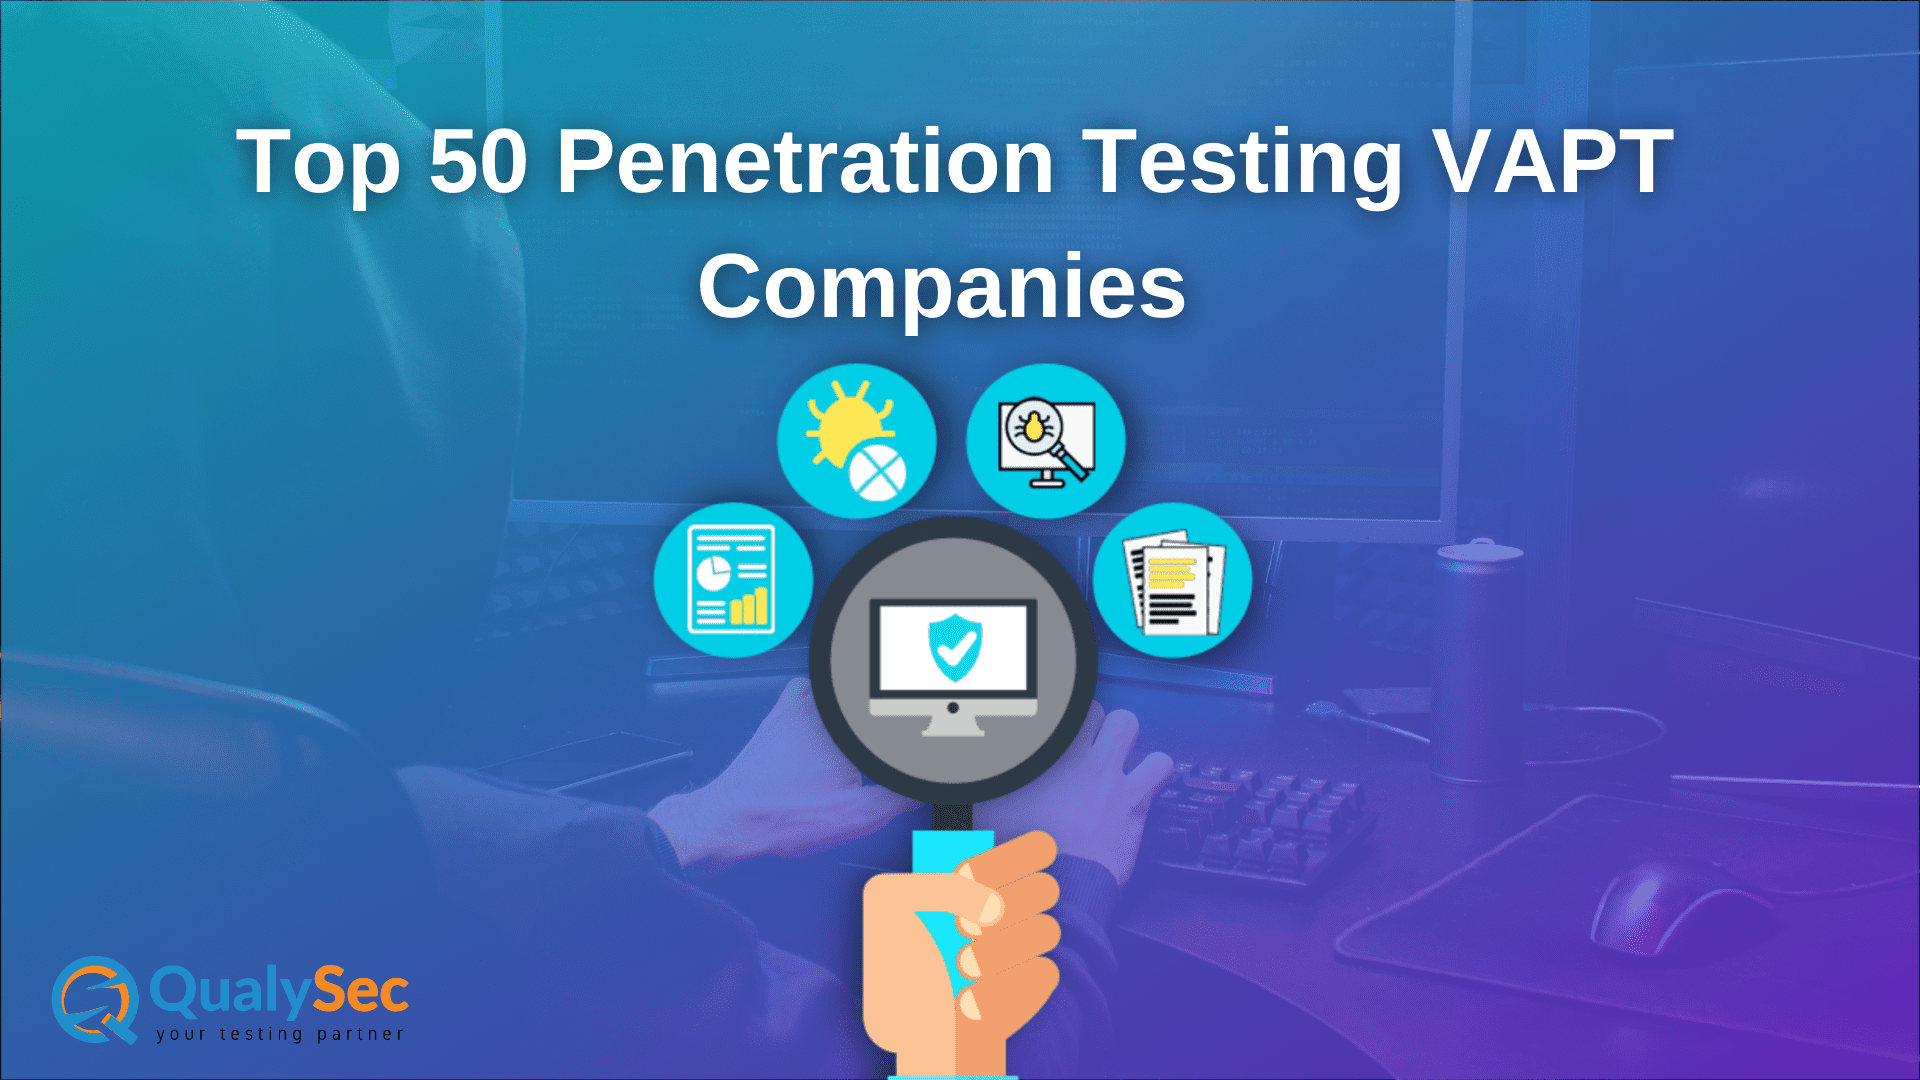 Top 50 Penetration Testing And VAPT Companies In 2022